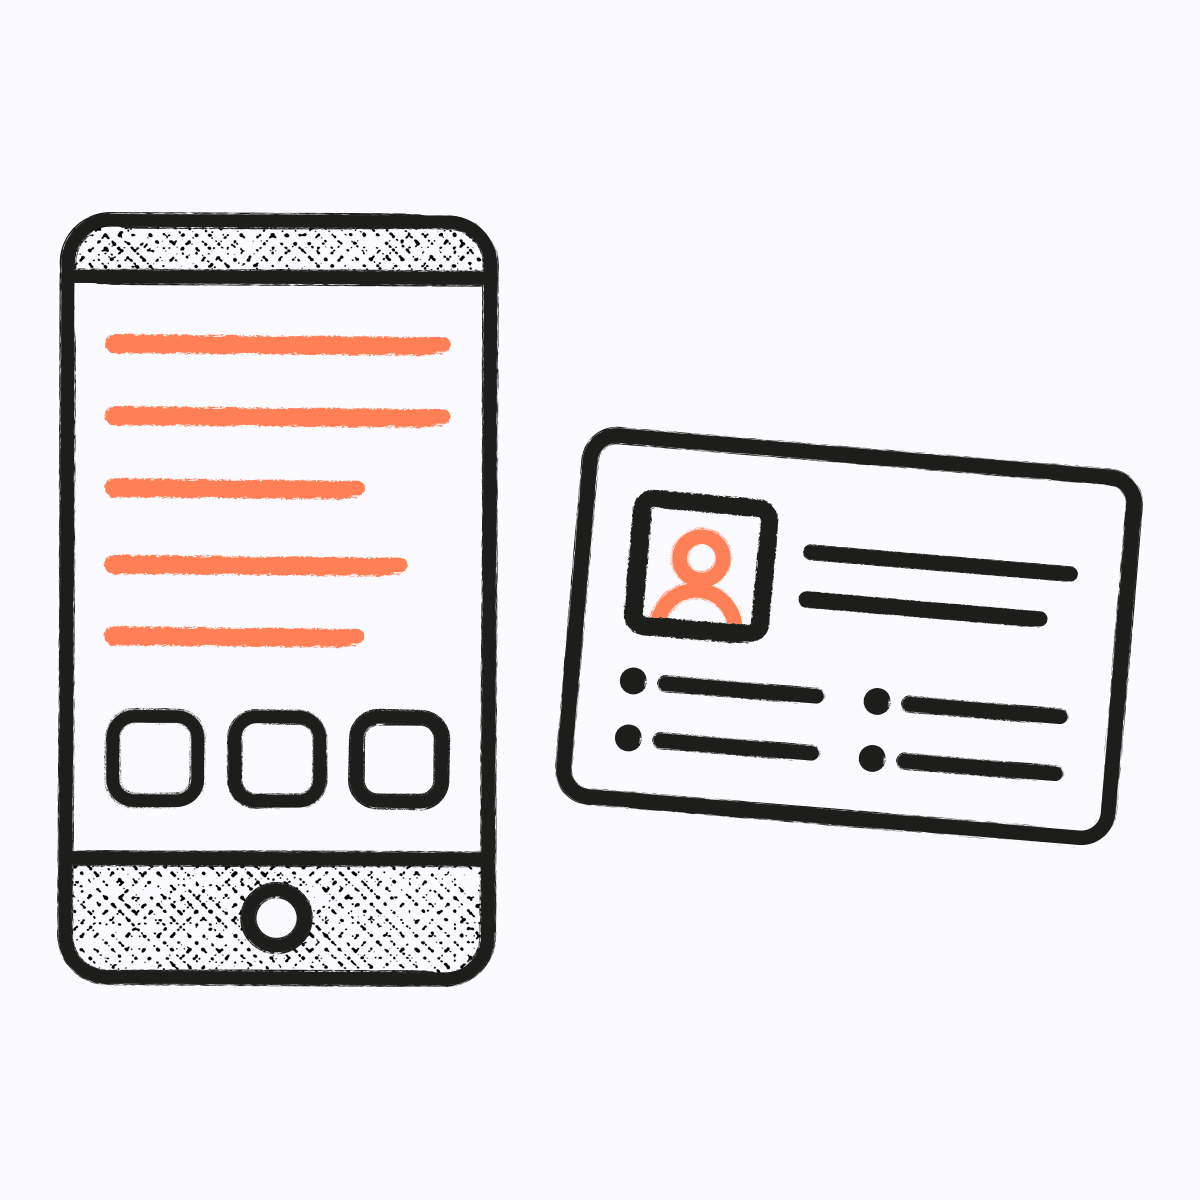 Illustration of mobile phone and identity card